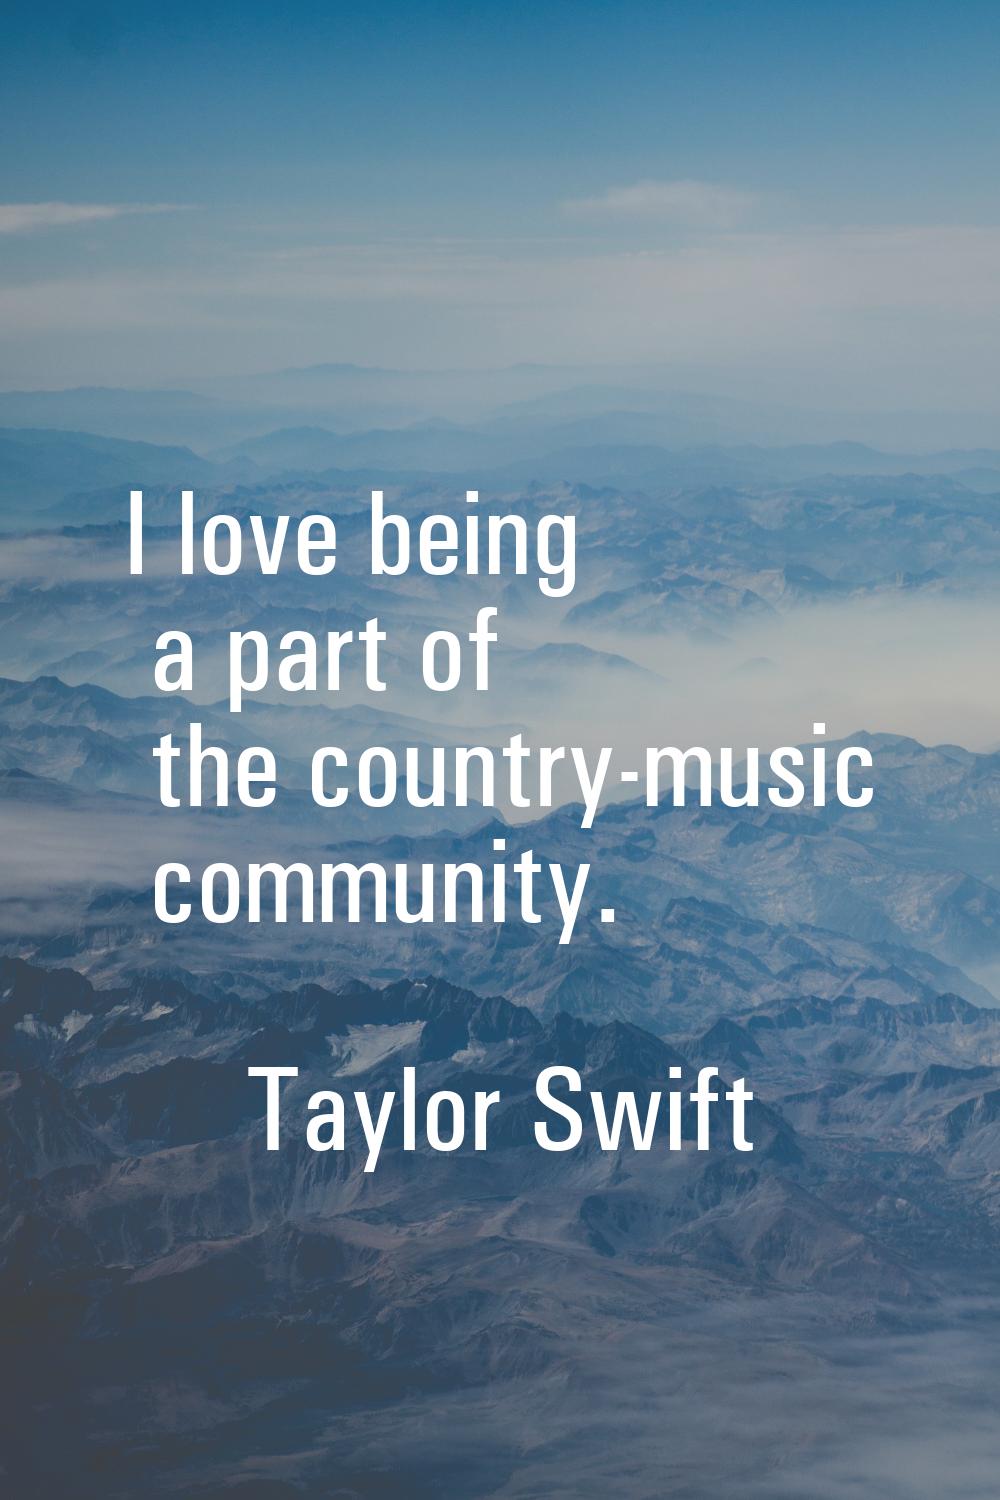 I love being a part of the country-music community.